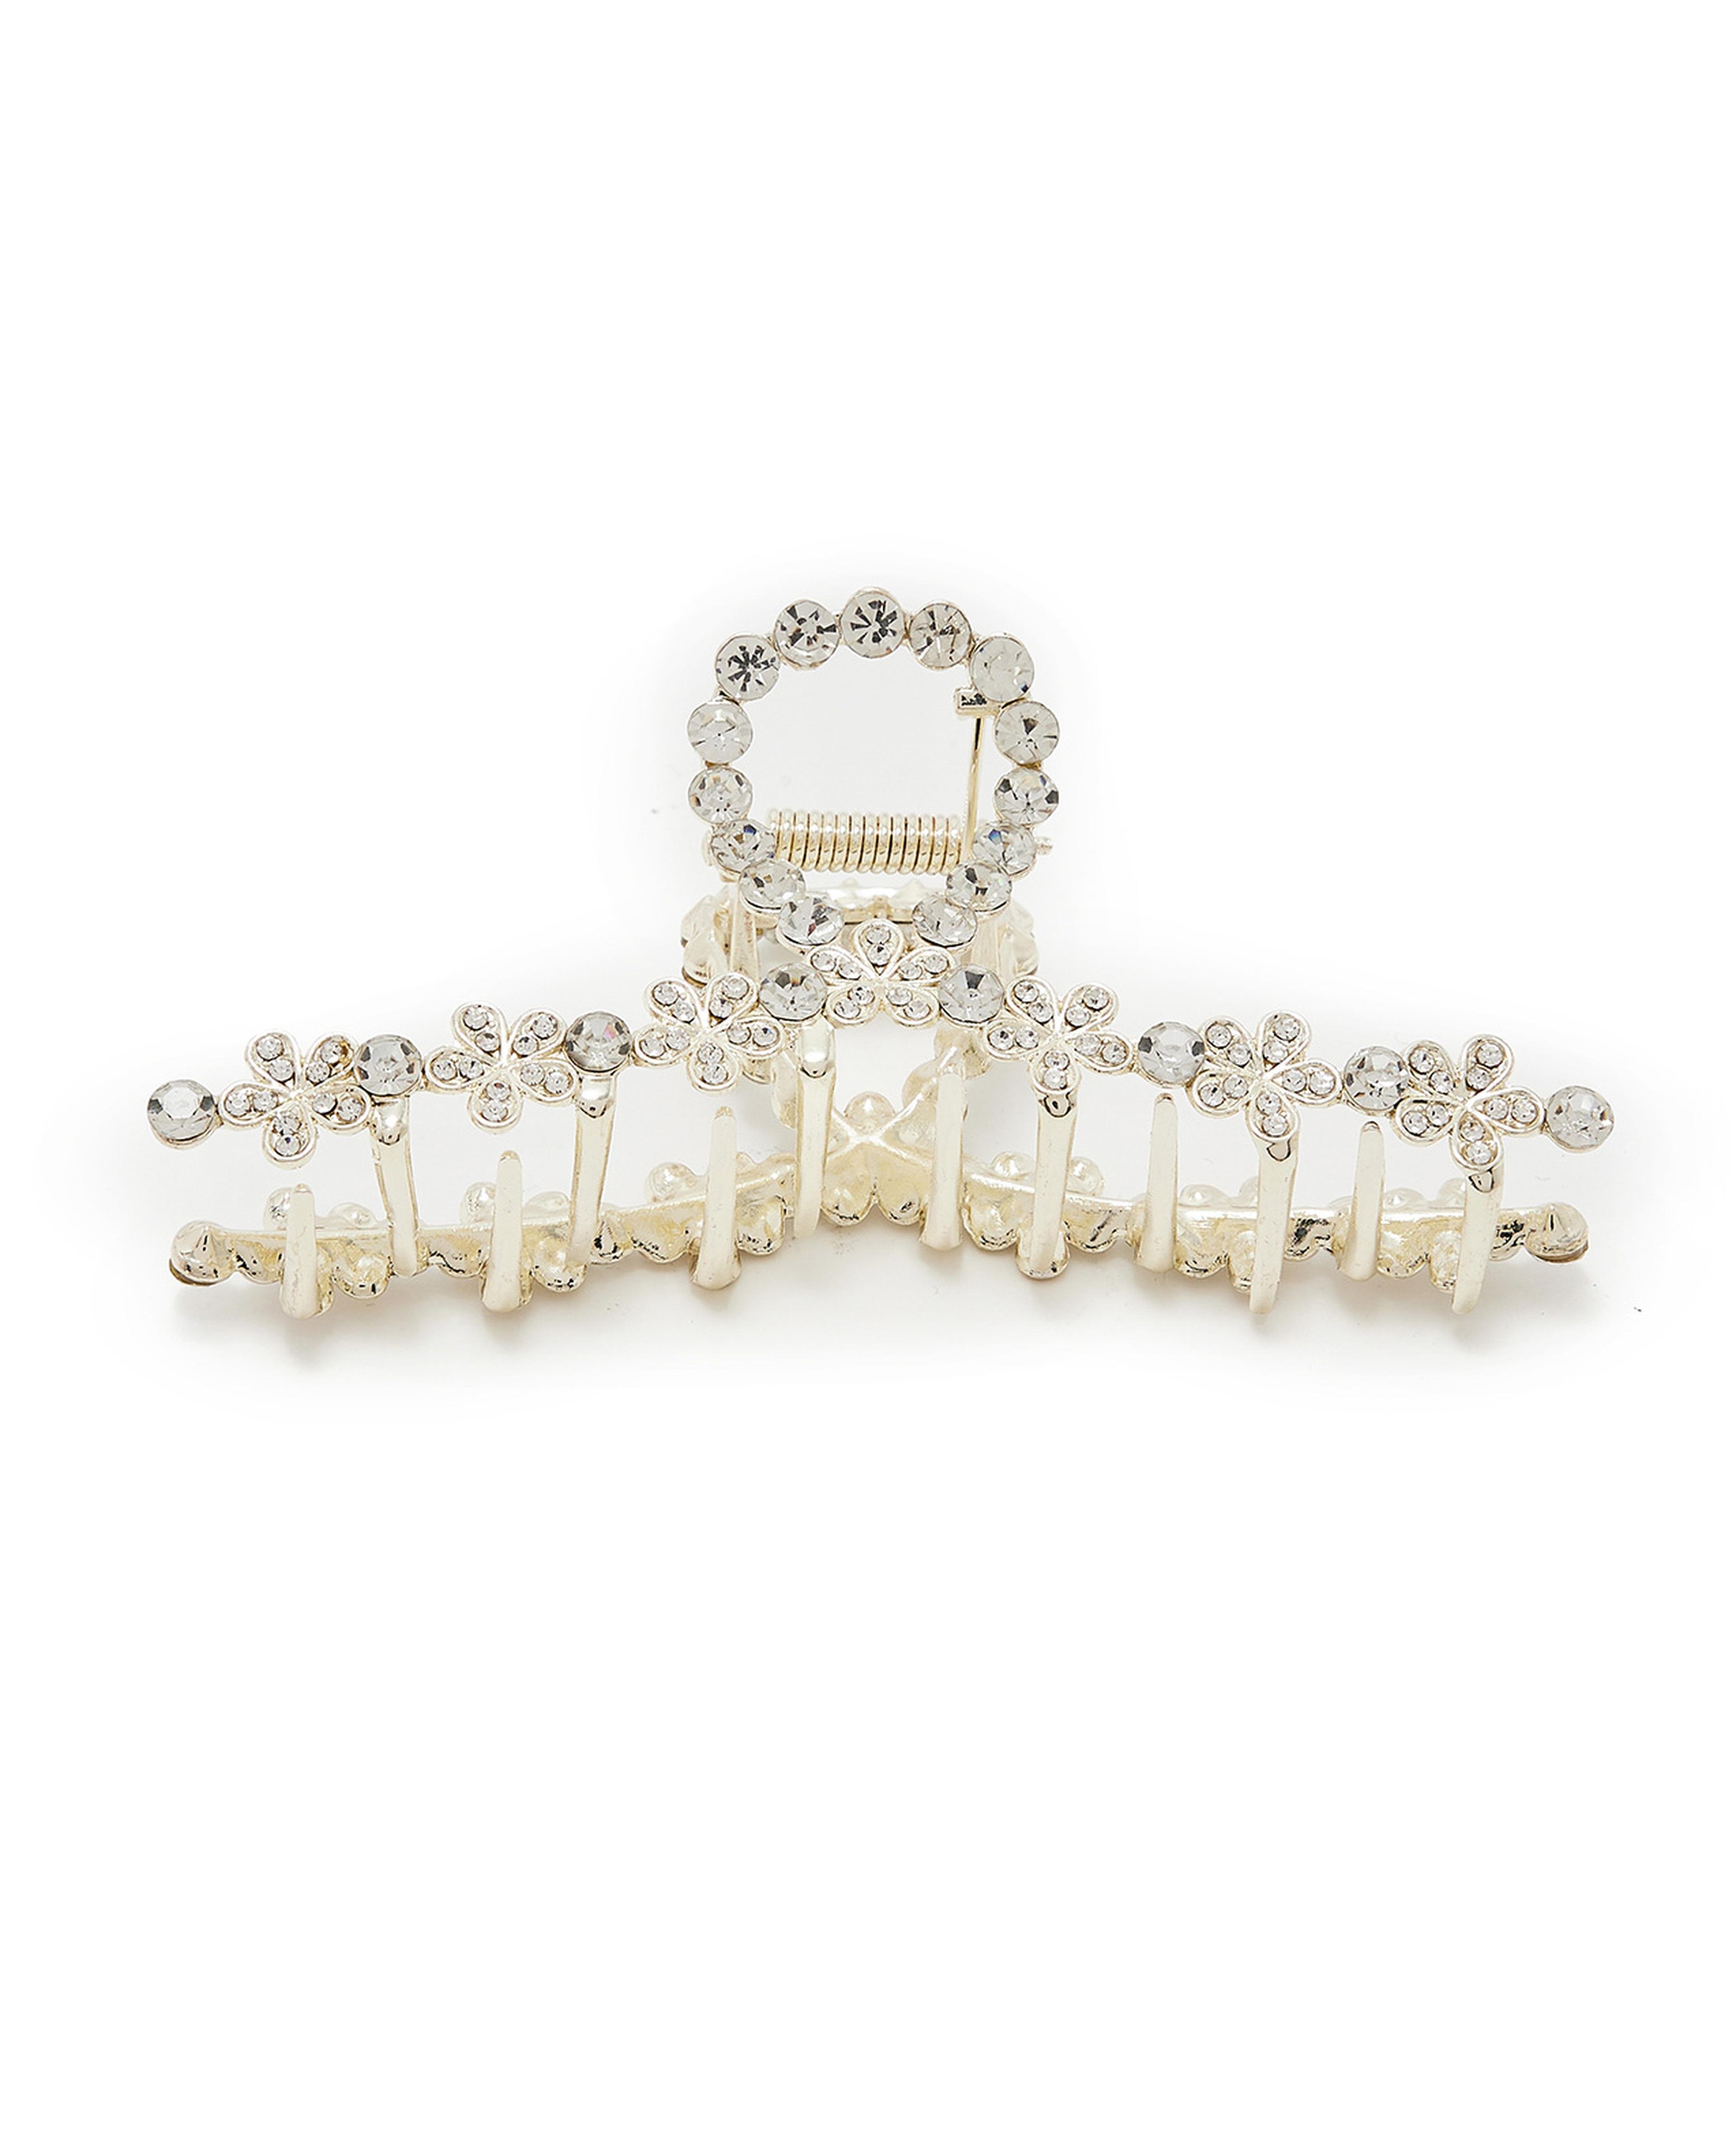 Embellished Claw Clip